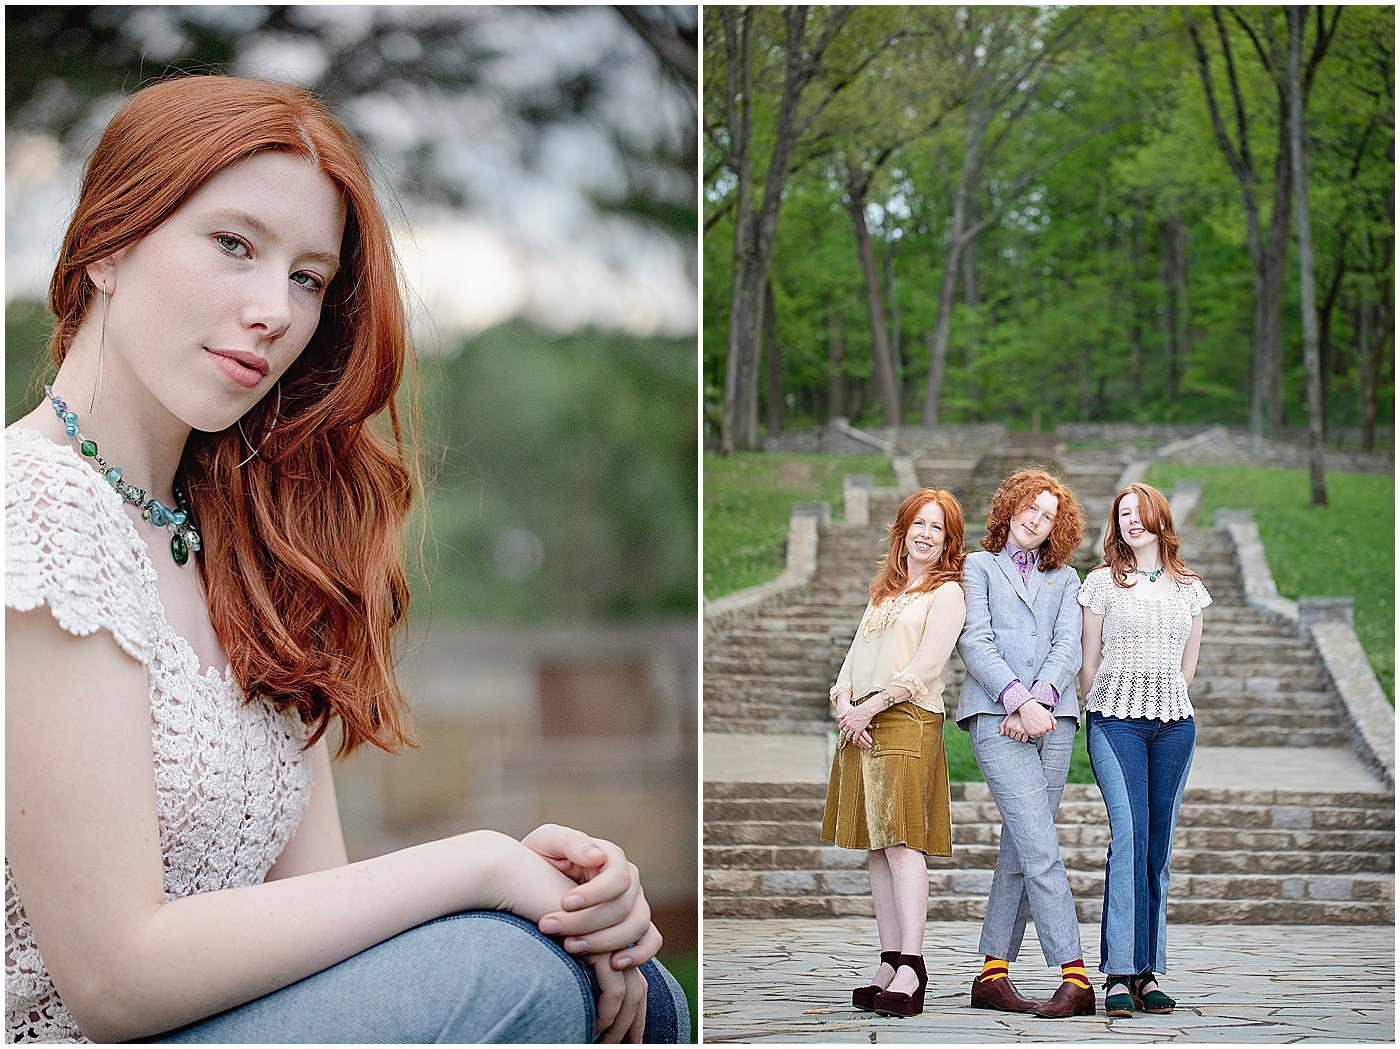 A Nashville family with fabulous red hair